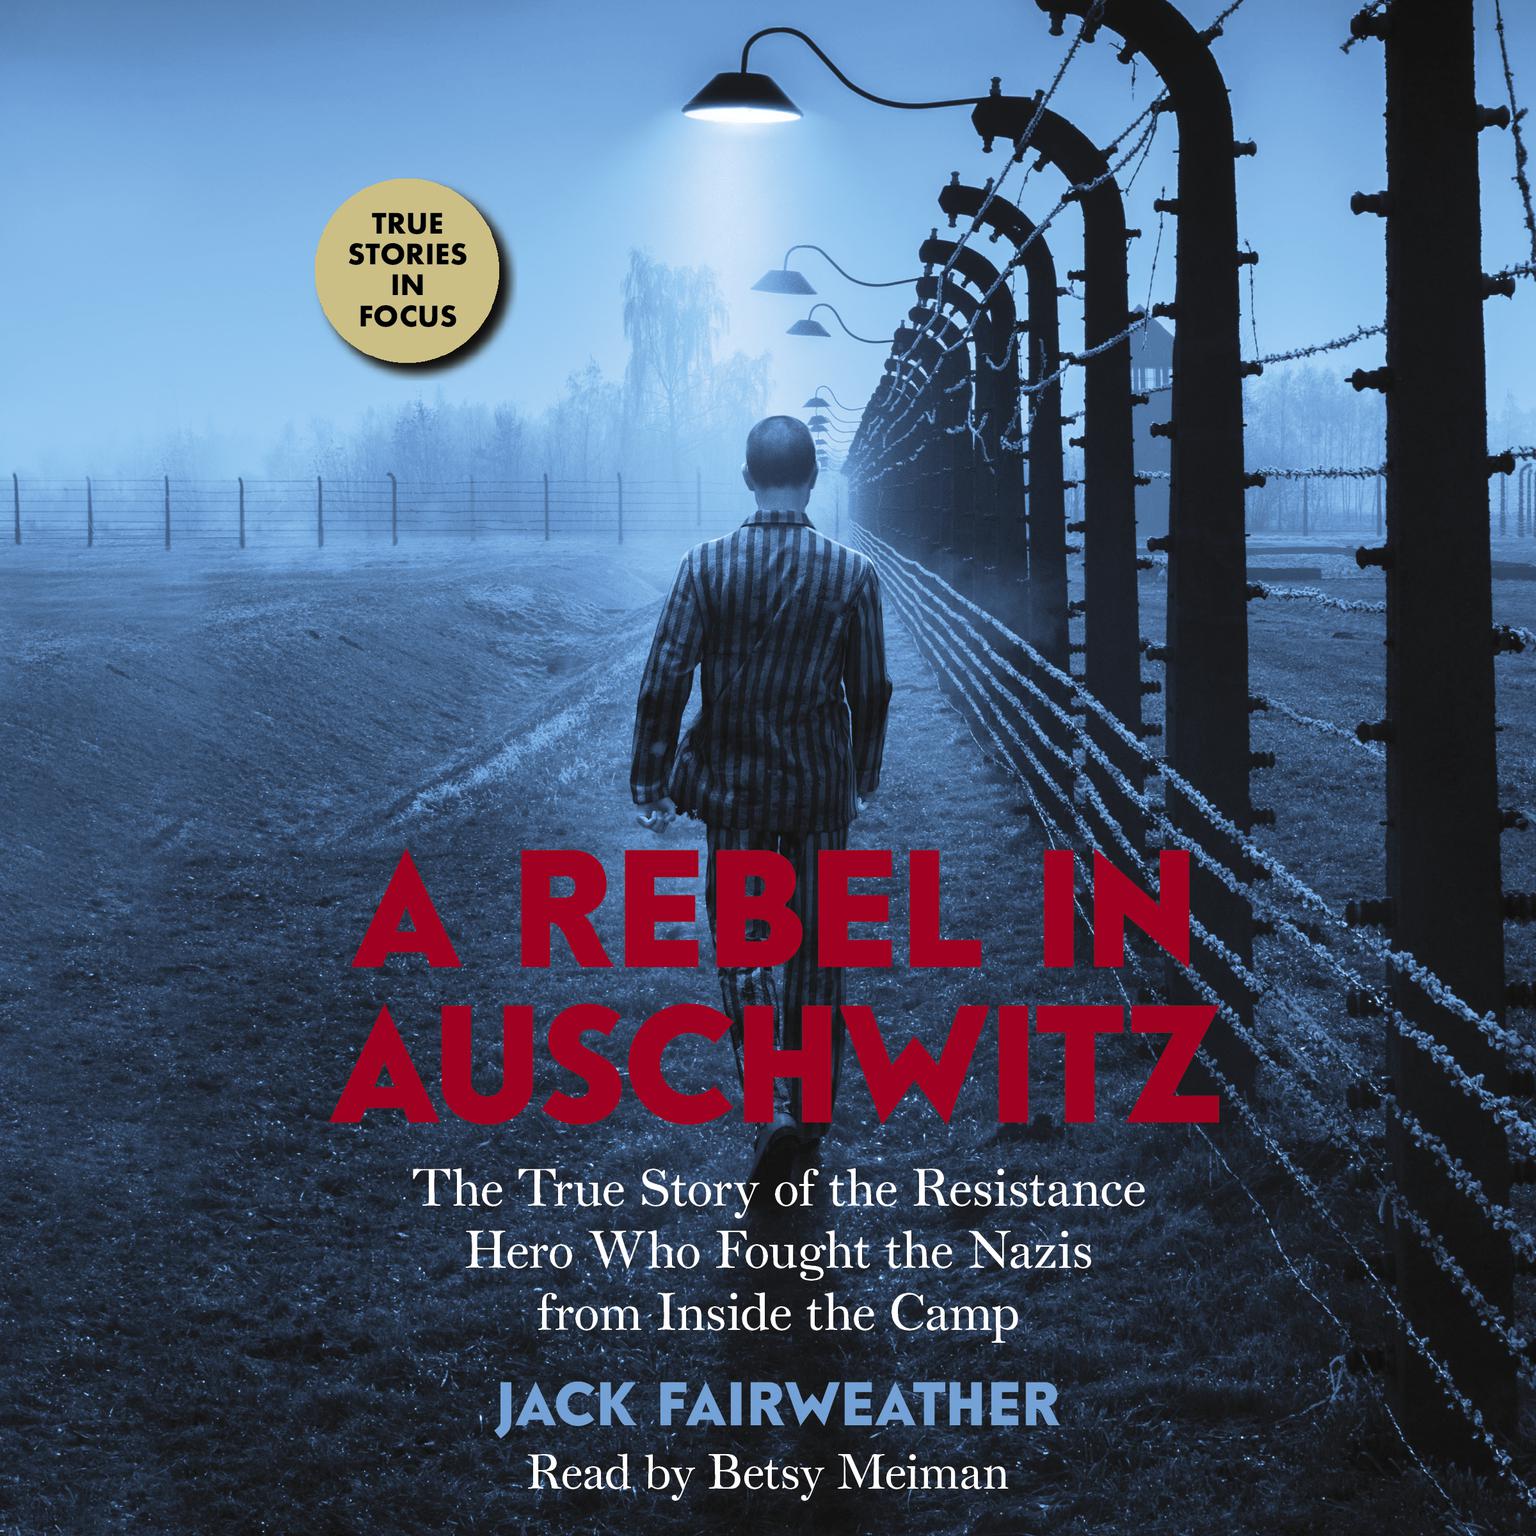 A Rebel in Auschwitz: The True Story of the Resistance Hero who Fought the Nazis from Inside the Camp: The True Story of the Resistance Hero Who Fought the Nazis Greatest Crime from Inside the Camp Audiobook, by Jack Fairweather